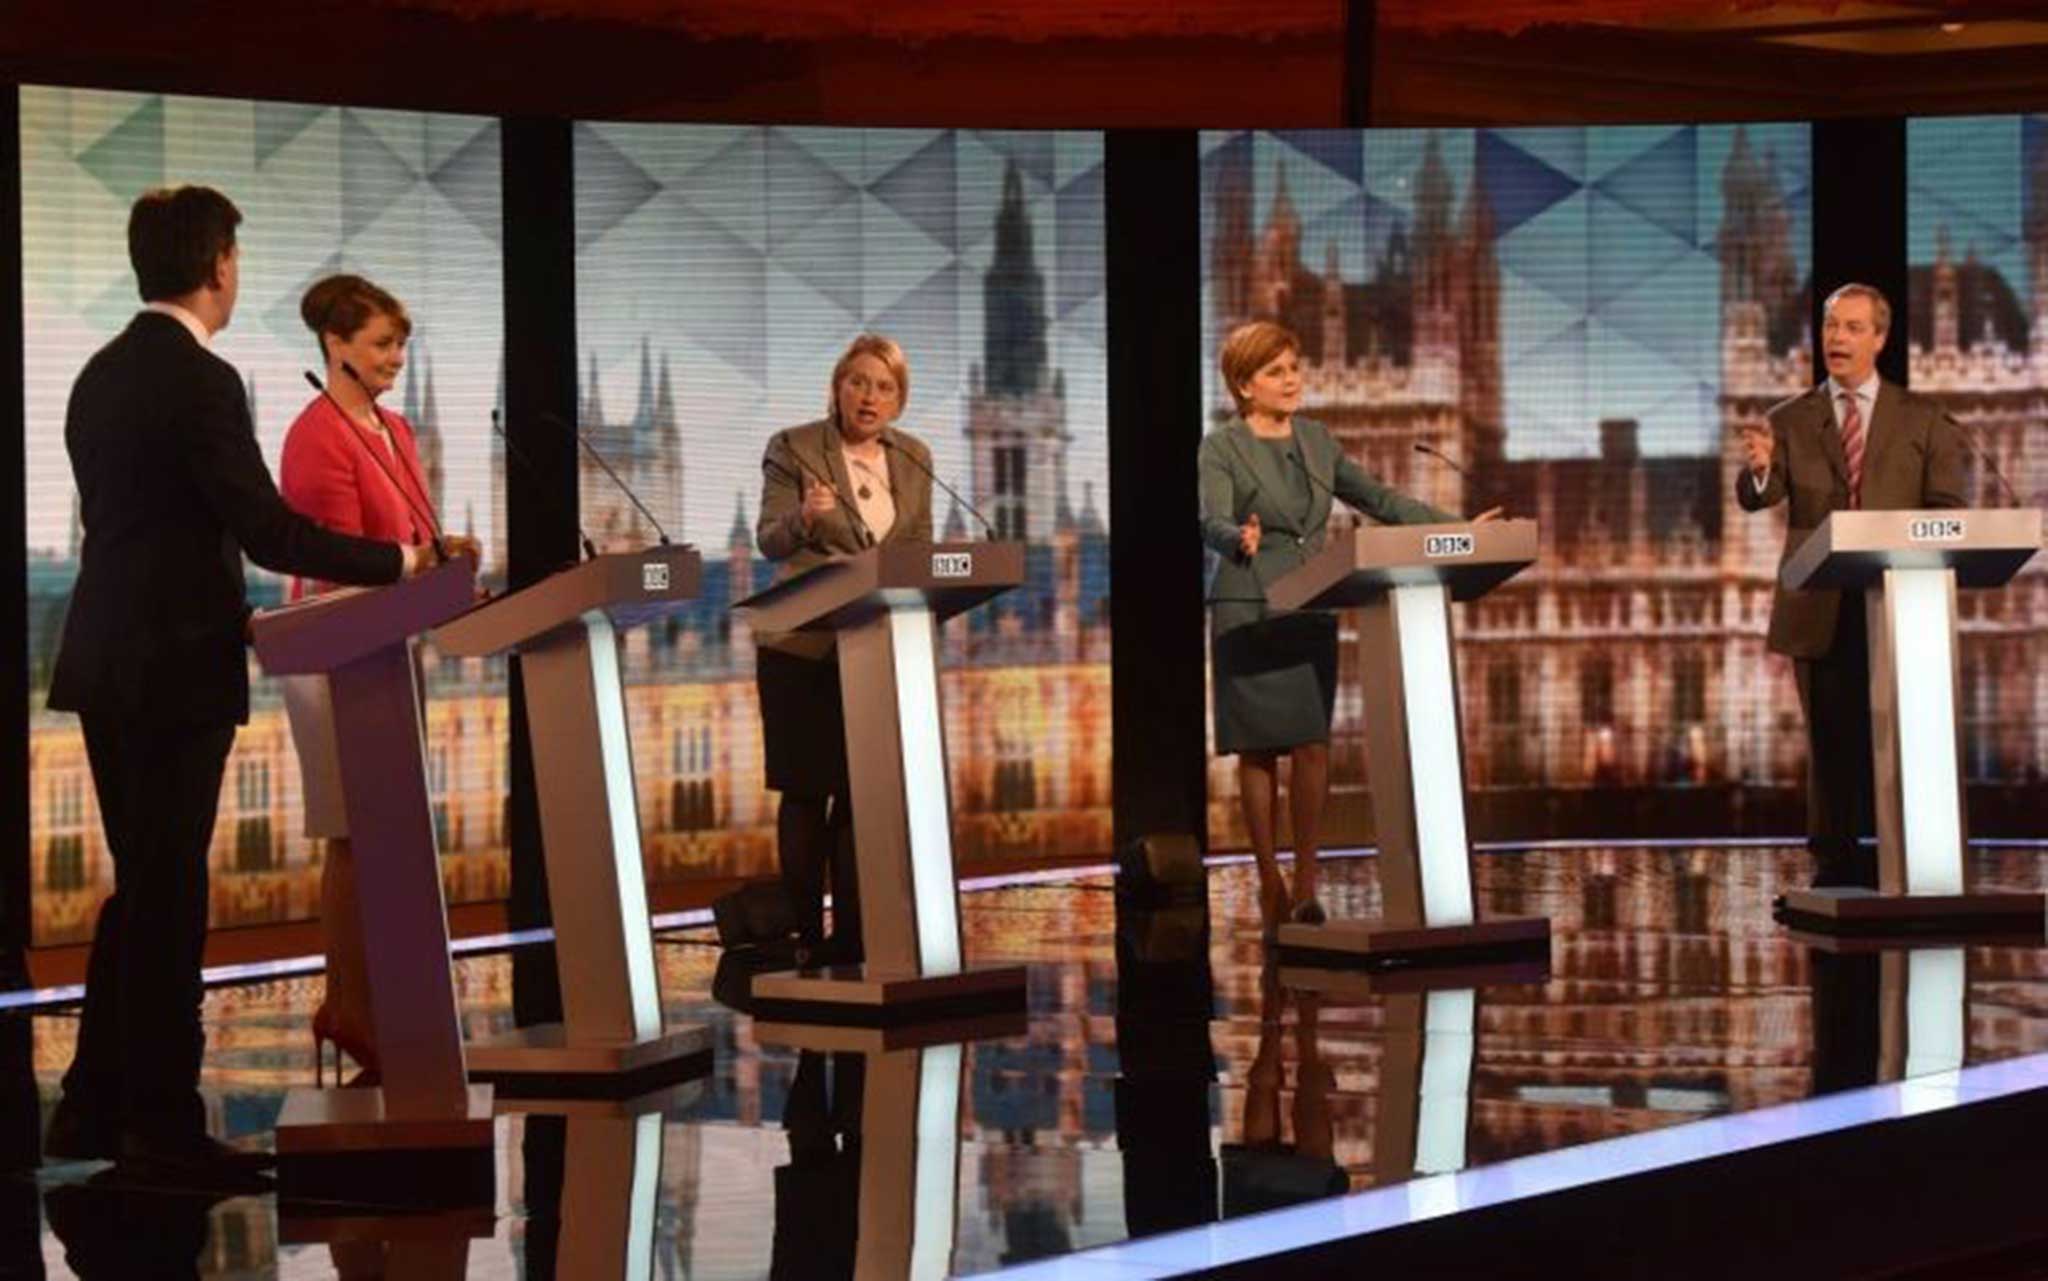 The five leaders debate became heated over the issue of the NHS